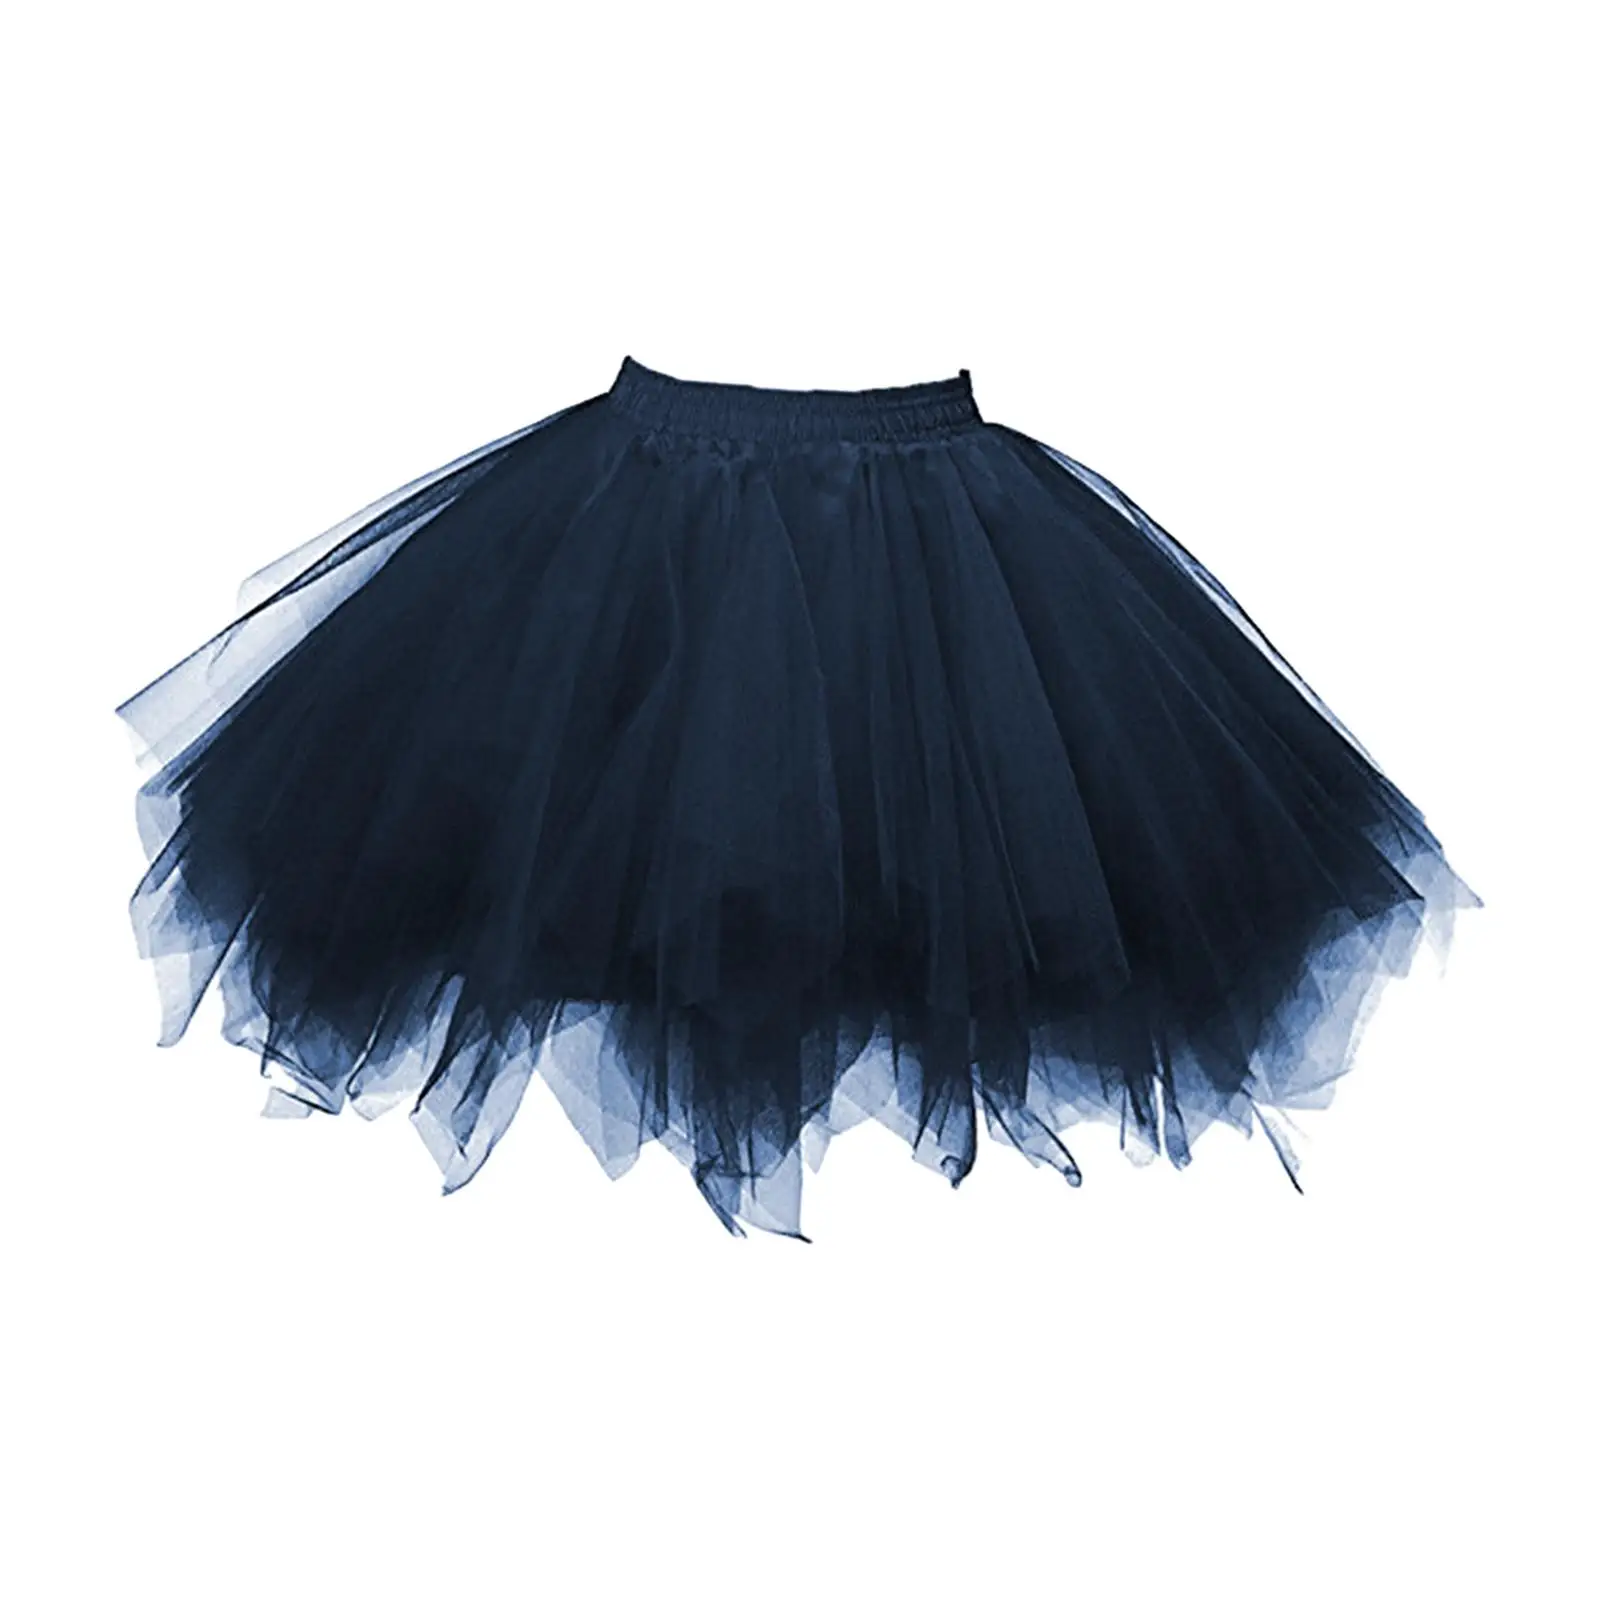 Women Tulle Tutu Skirt Party Adults Supplies Ballet Dance Tulle Petticoat Costume Dress for Proms Events Stage Rehearsal Concert